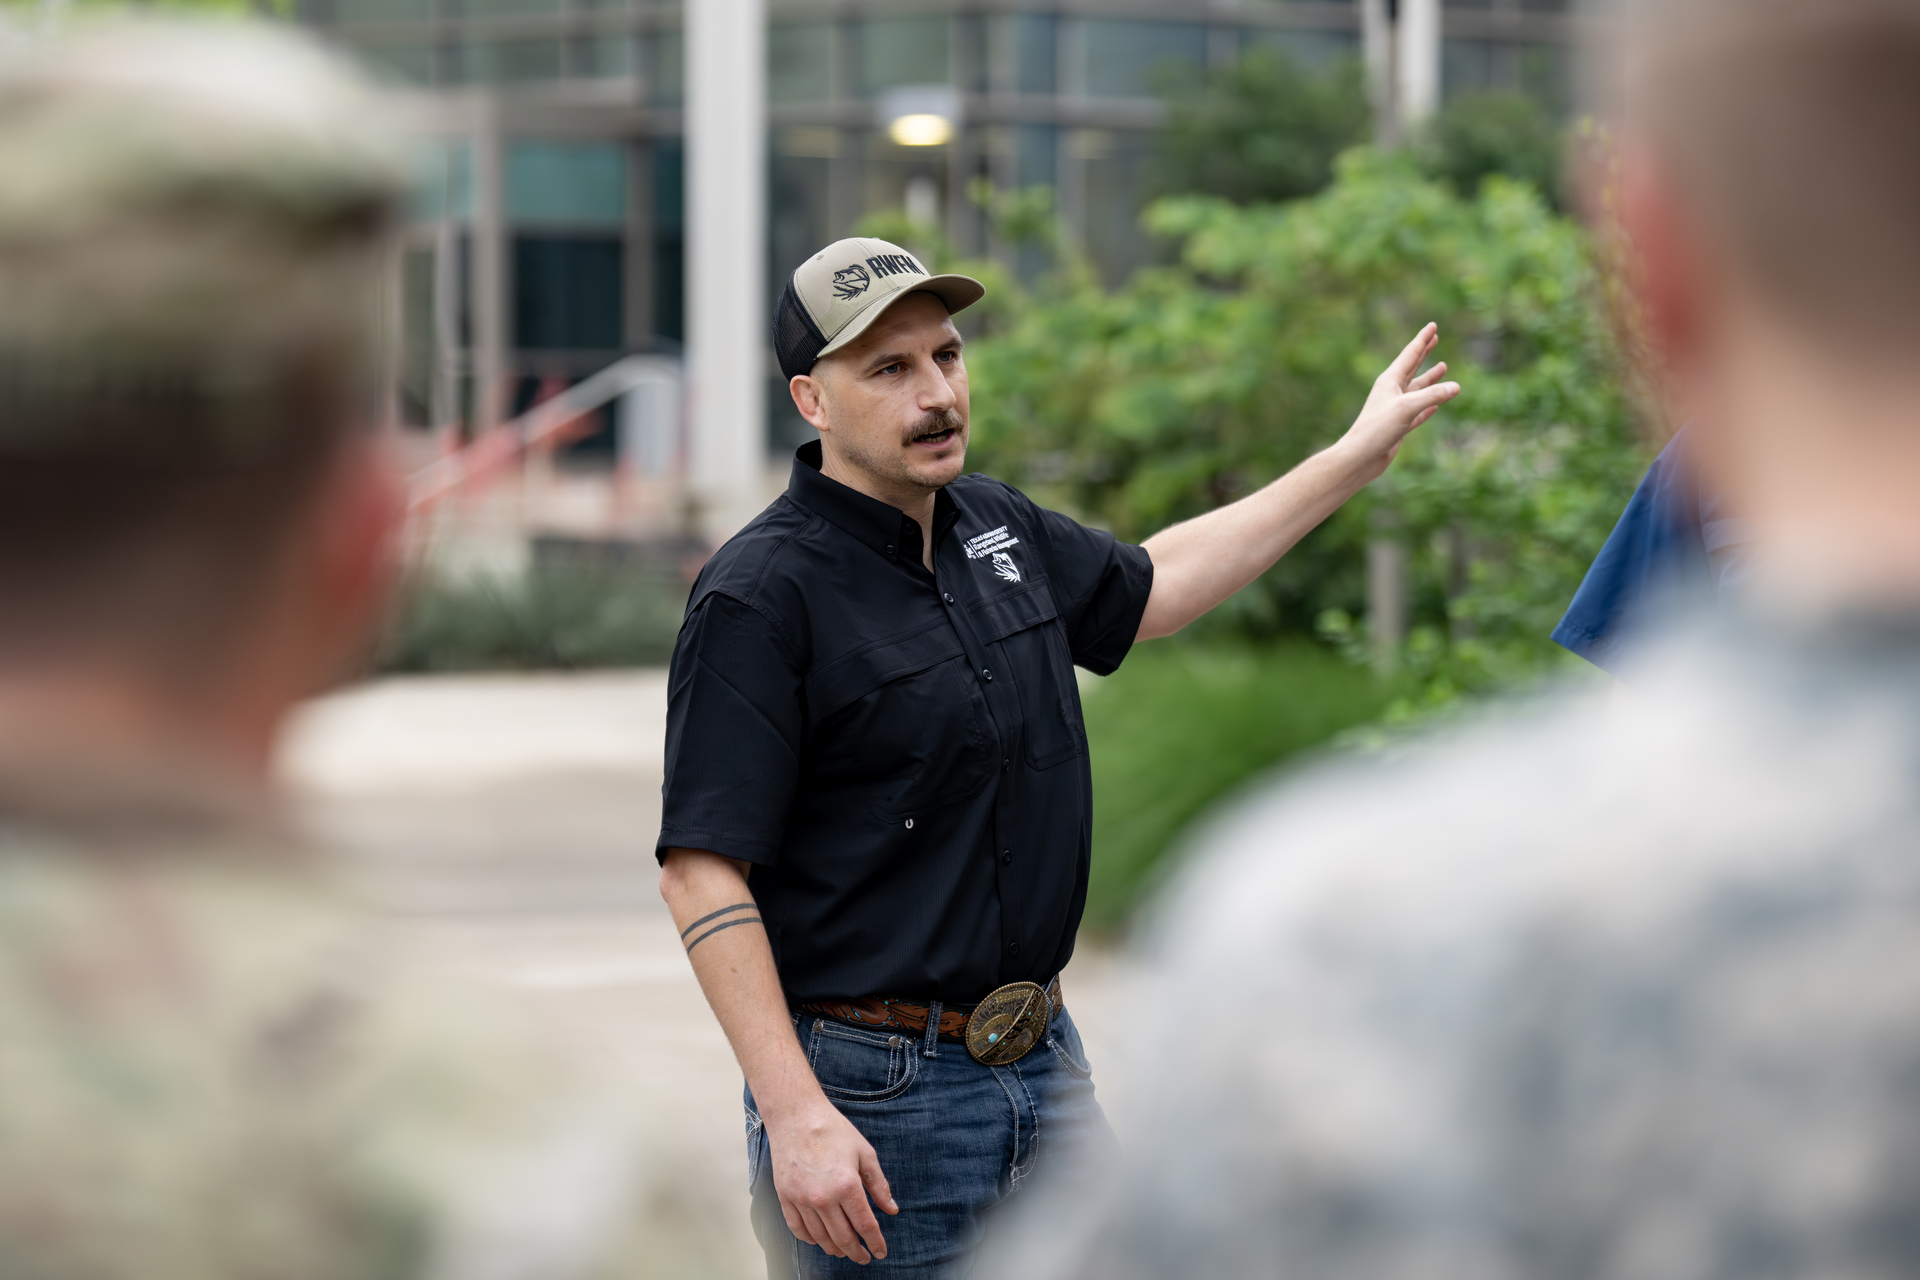 A man (Ty Werdel, Ph.D., assistant professor in the Texas A&M University Department of Rangeland, Wildlife and Fisheries Management) explains squirrel trapping procedures to students